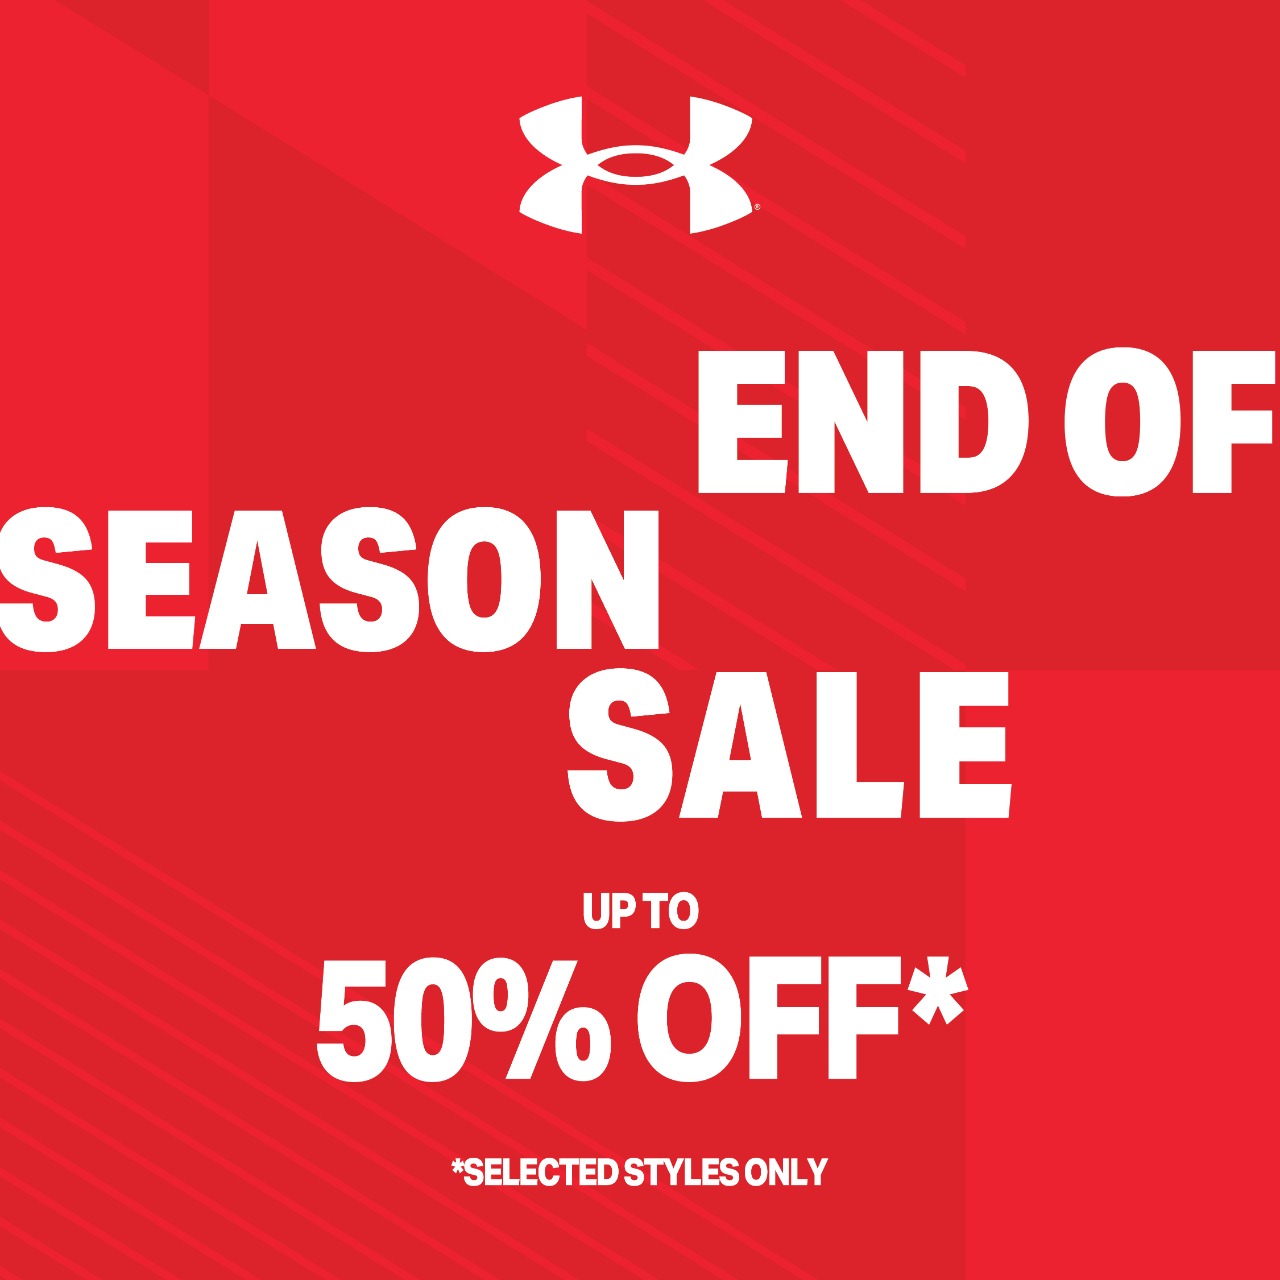 UNDER ARMOUR END OF SEASON SALE Up to 50% for selected items. | CENTRAL ...